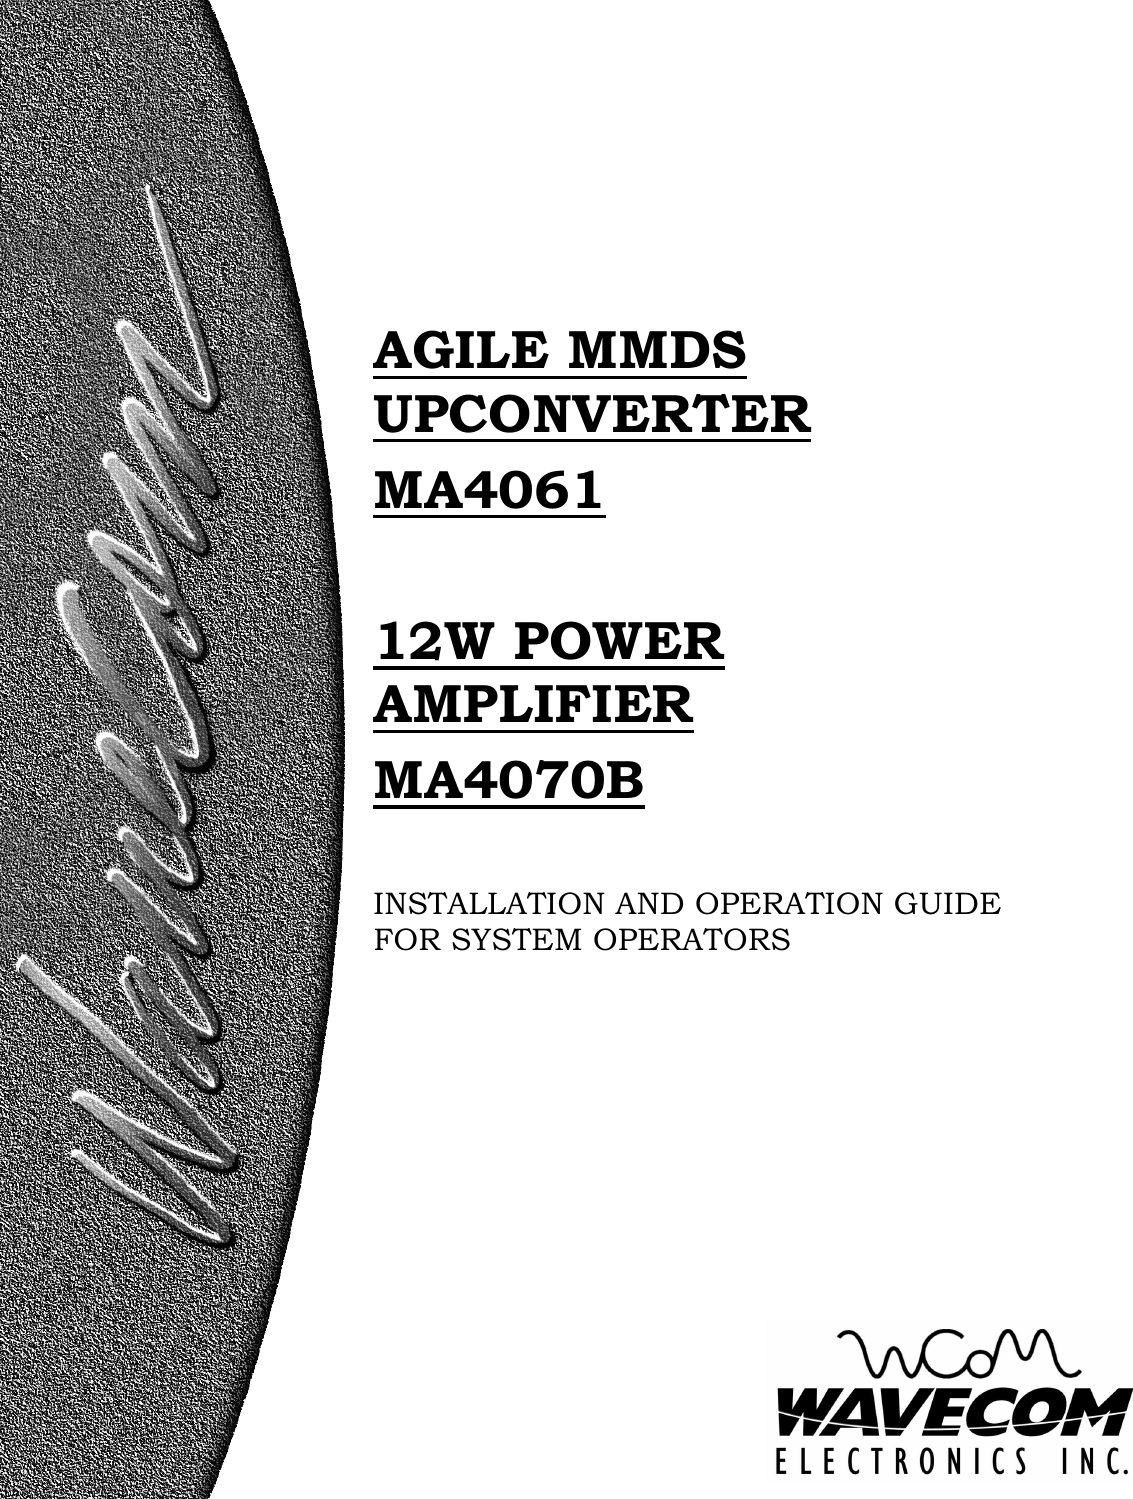   AGILE MMDS UPCONVERTER MA4061  12W POWER AMPLIFIER MA4070B   INSTALLATION AND OPERATION GUIDE FOR SYSTEM OPERATORS 